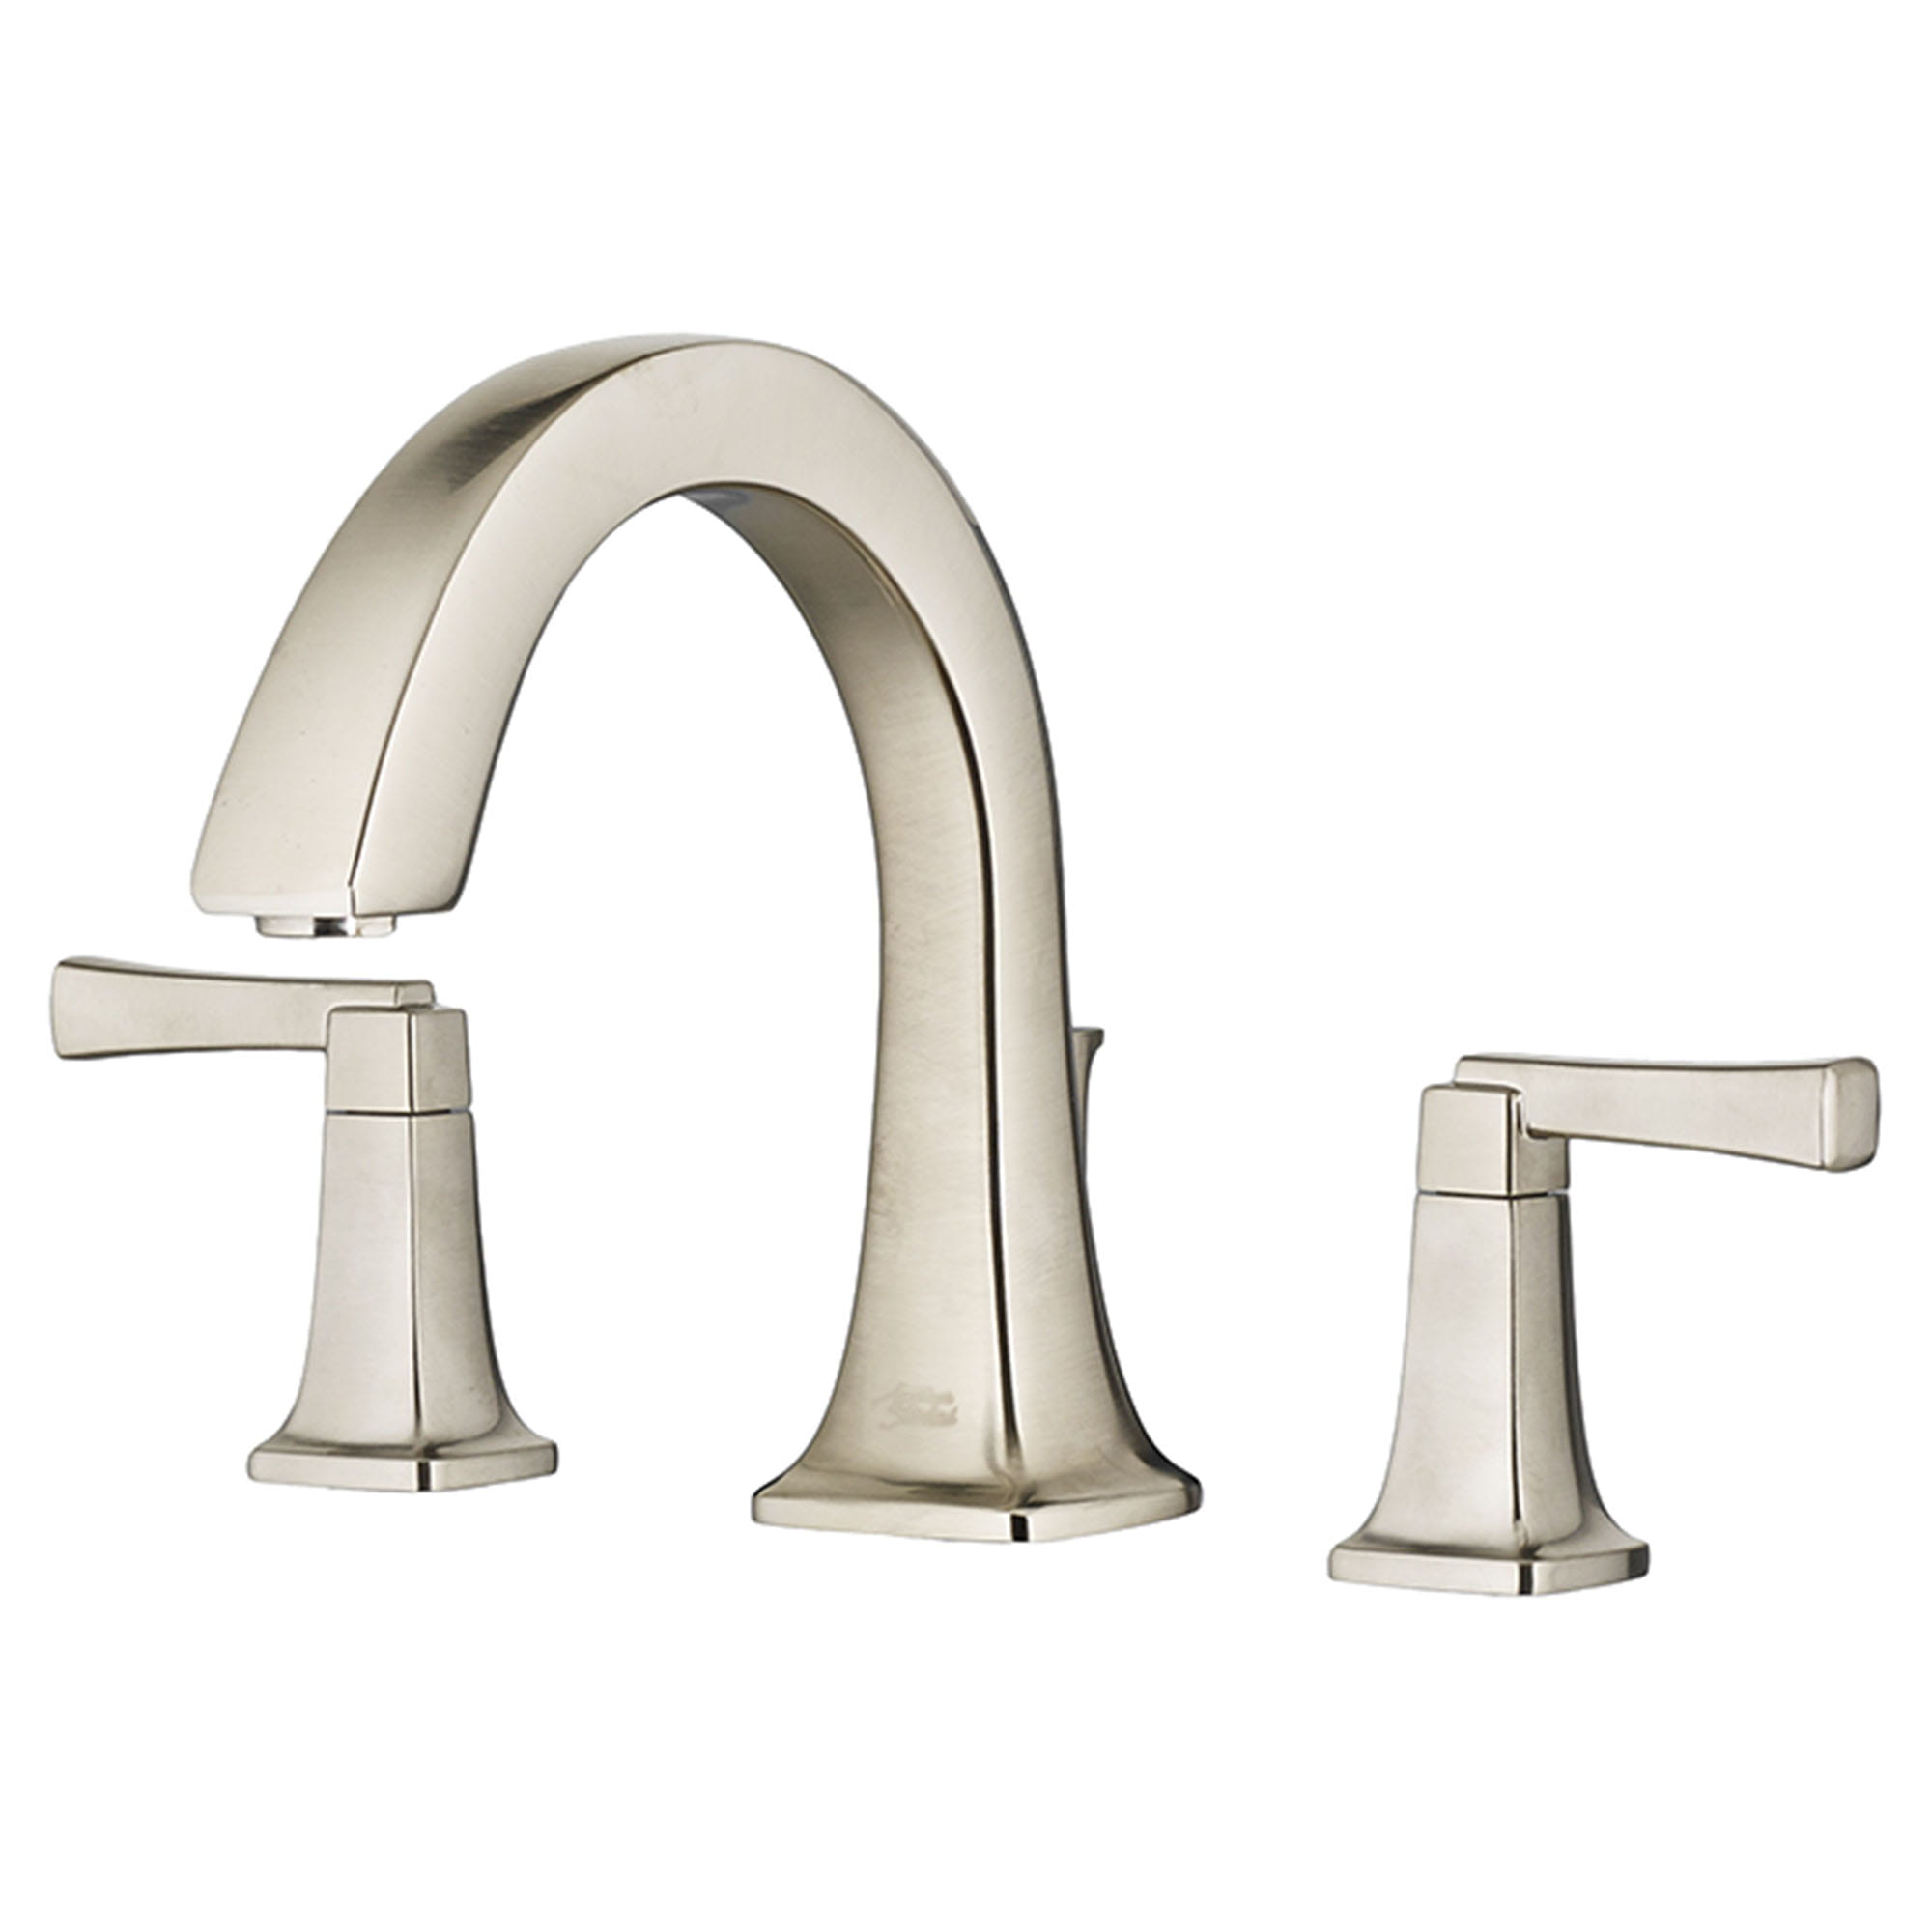 Townsend Bathtub Faucet With Lever Handles for Flash Rough In Valve   BRUSHED NICKEL